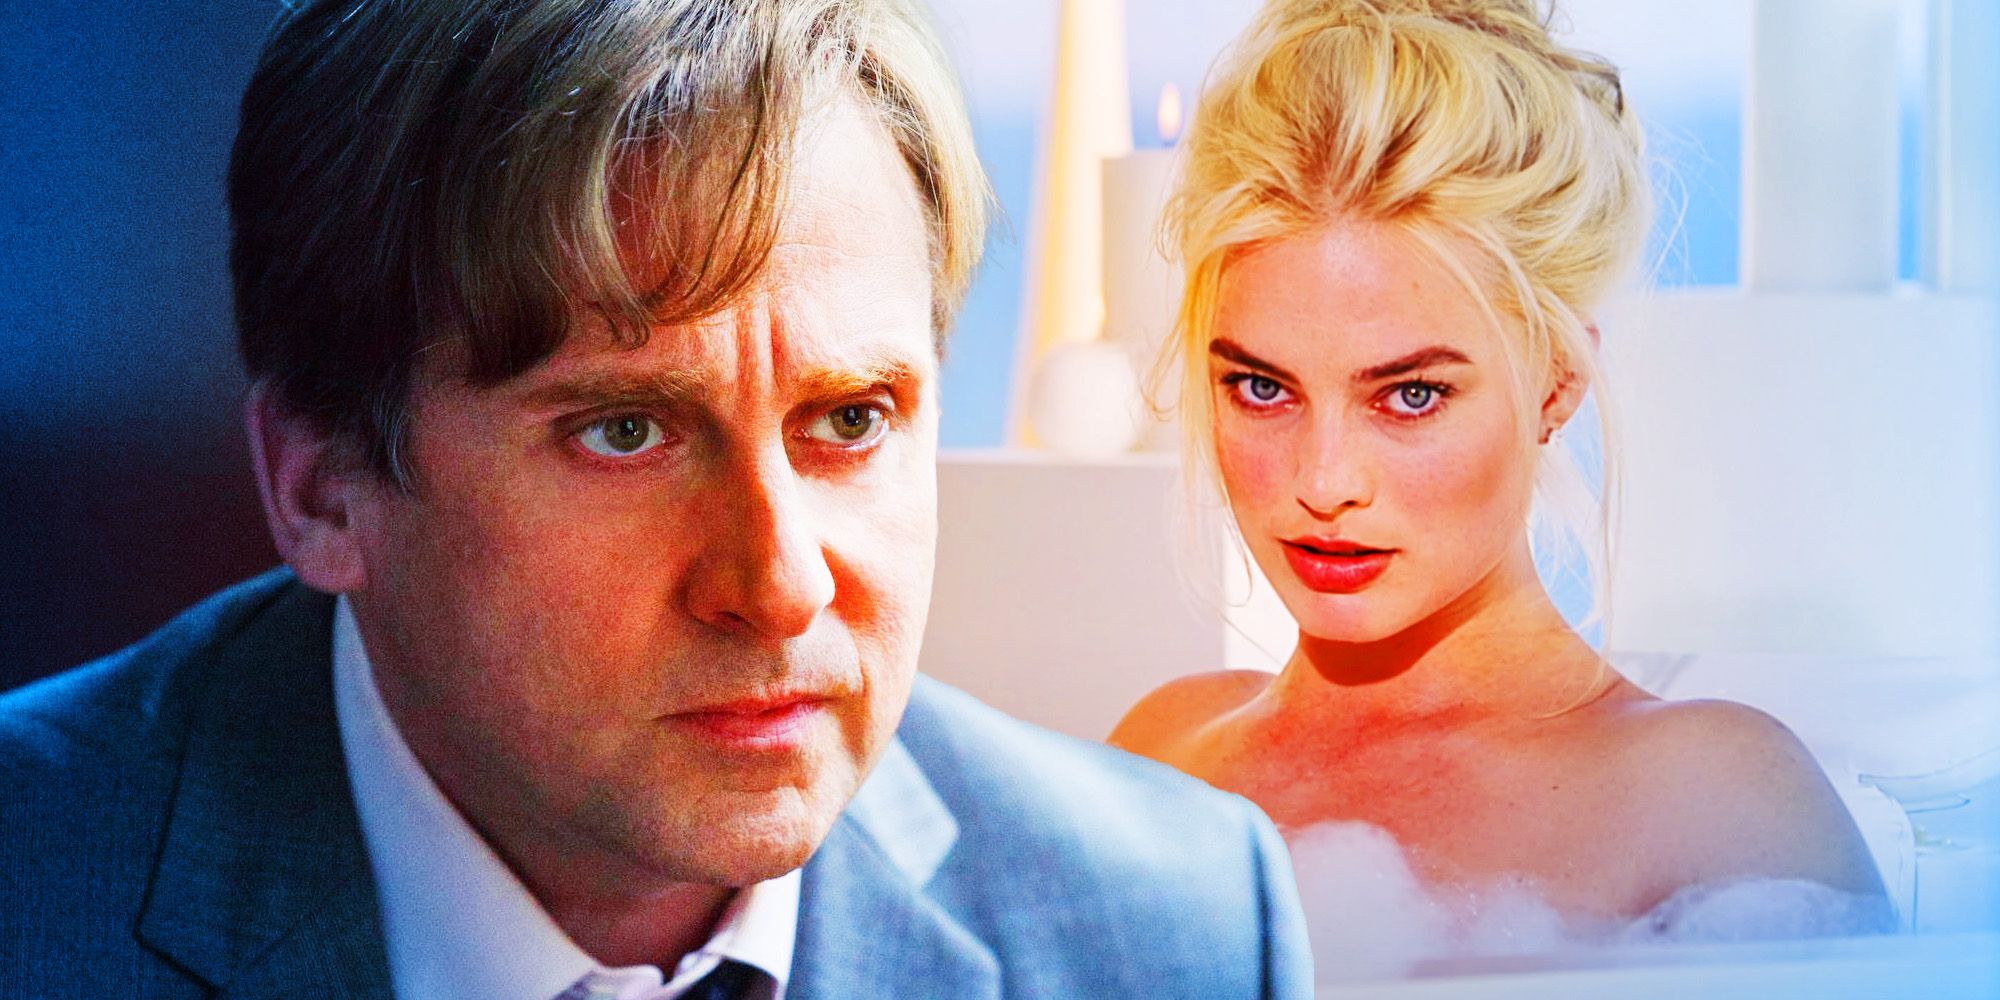 Steve Carell and Margot Robbie in The Big Short.